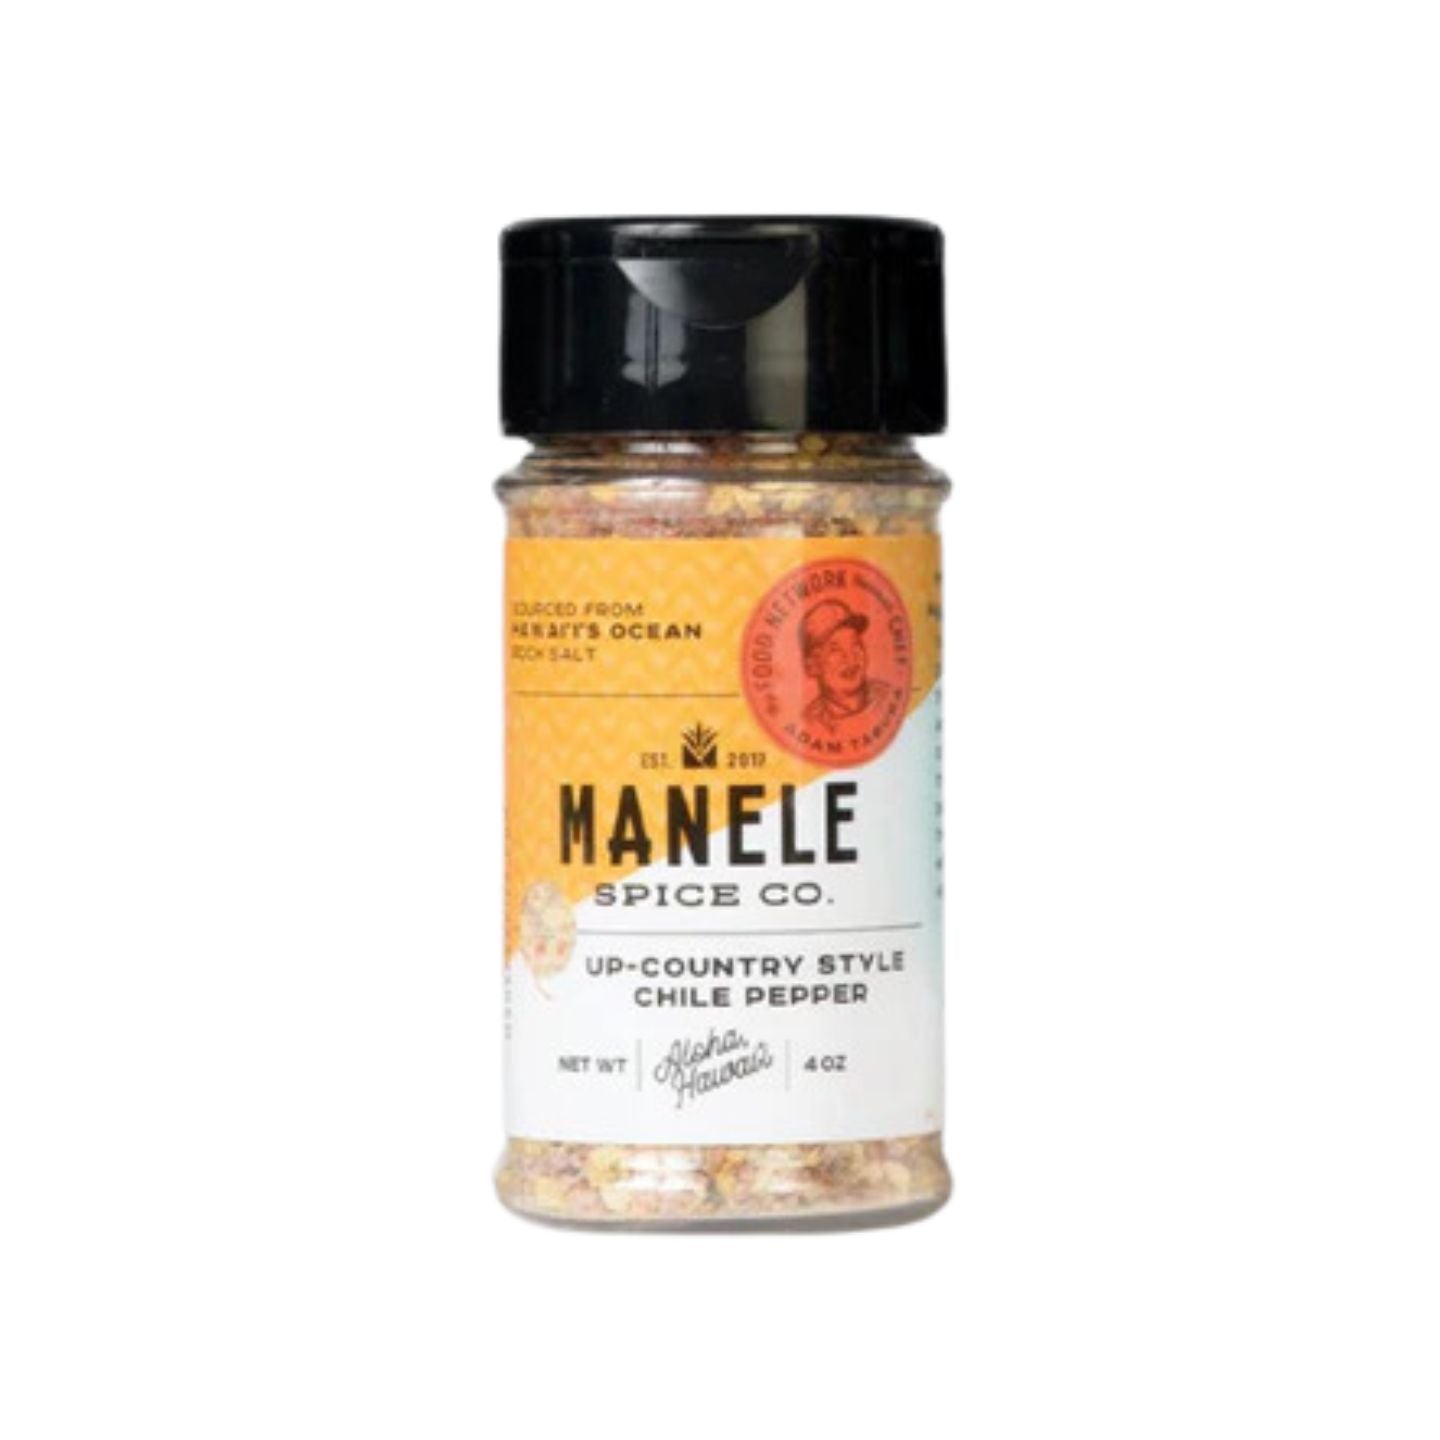 Pop-Up Mākeke - Manele Spice Co. - Upcountry Style Chile Pepper - Front View